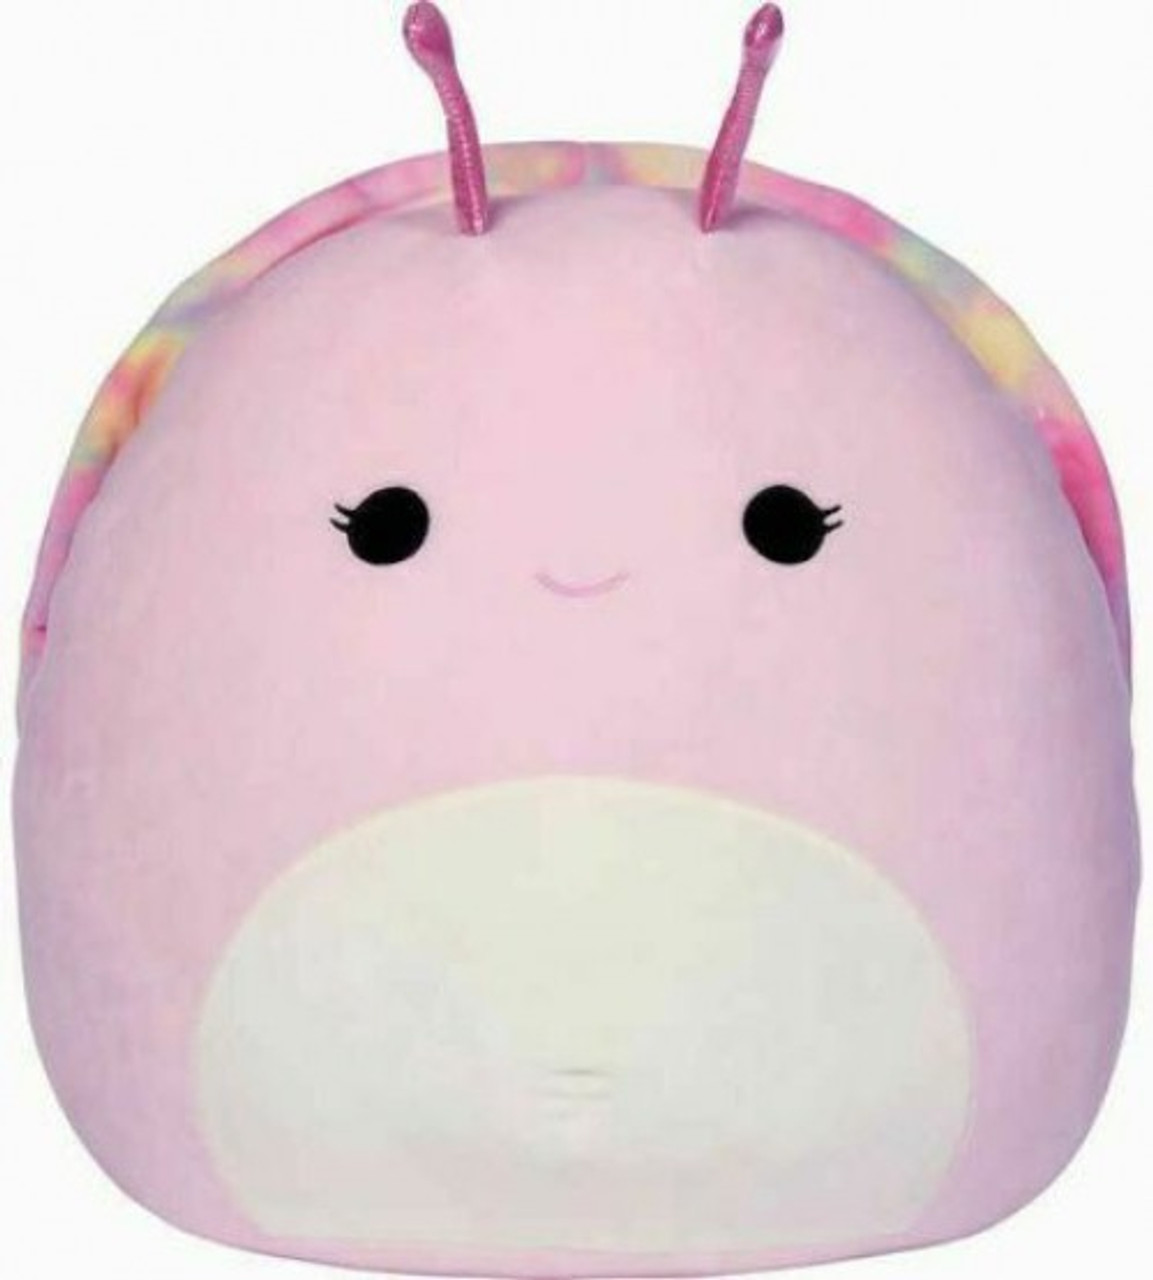 Squishmallows Silvina 8 inch Plush Toy for sale online